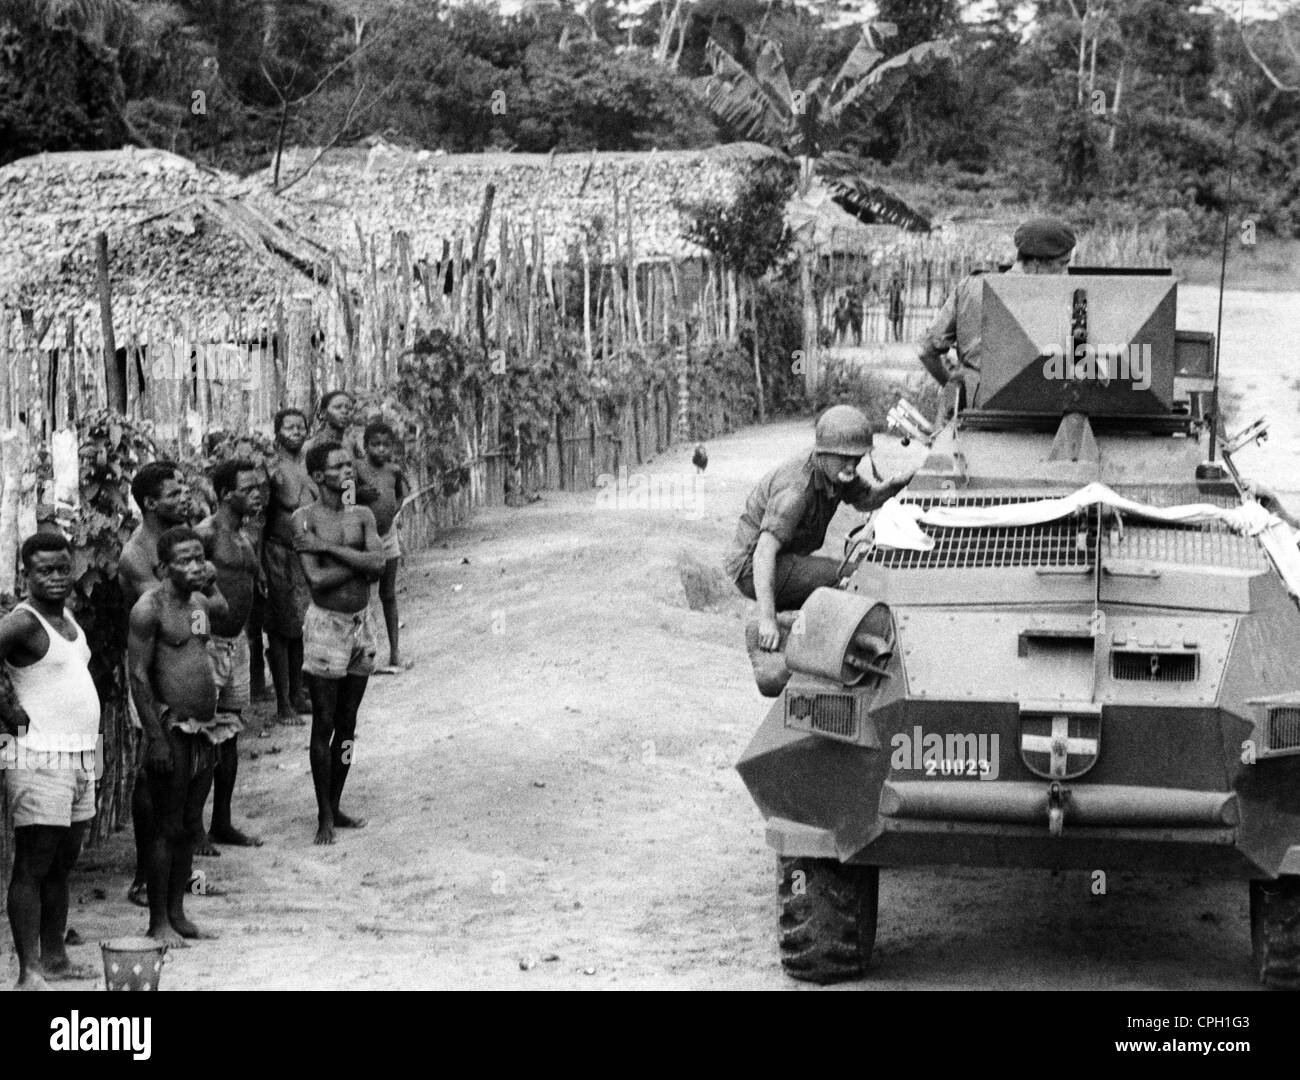 geography/travel, Congo, events, Simba uprising 1964 - 1965, mercenaries with armoured vehicle in a village on the street from Lisala to Bumba, Equateur province, 6.10.1964, Democratic Republic of the Congo, Congo Crisis, Civil War, military, arms, Africa, 20th century, historic, historical, arms, tank, 1960s, people, Additional-Rights-Clearences-Not Available Stock Photo